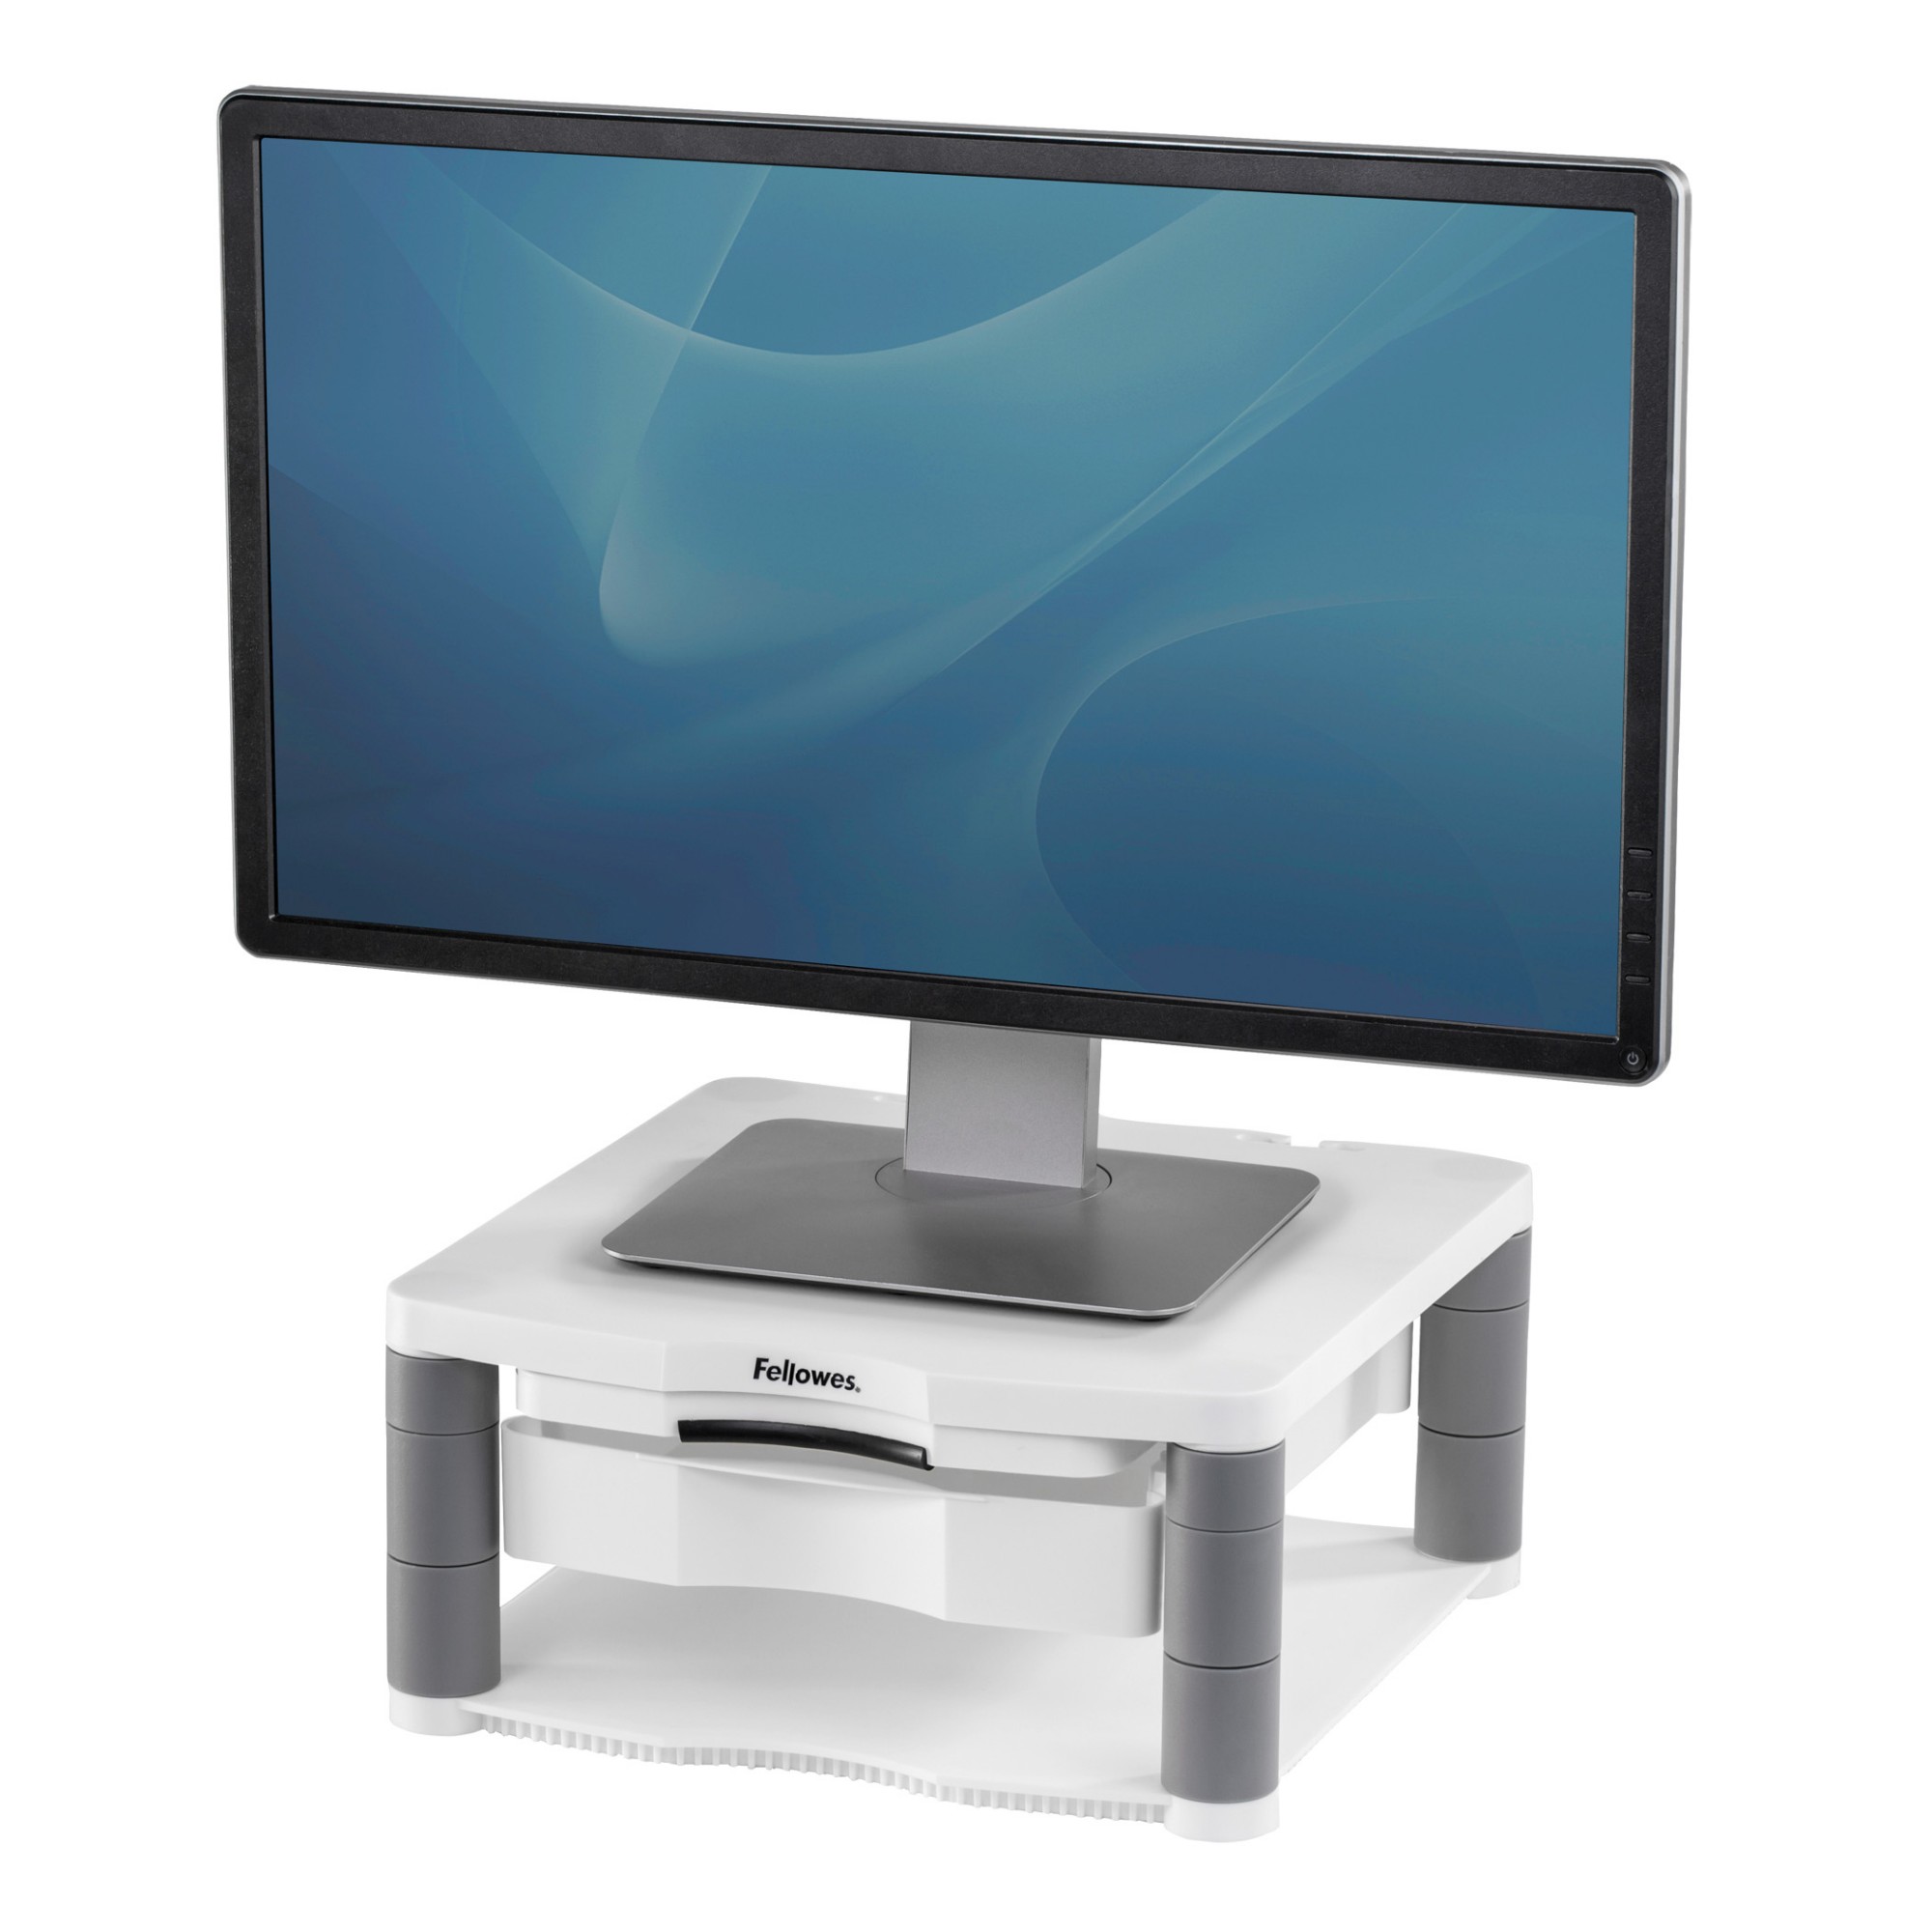 Fellowes Computer Monitor Stand with 3 Height Adjustments - Premium Monitor Riser Plus with Cable Management - Ergonomic Adjustable Monitor Stand for Computers - Max Weight 36KG/Max Size 21" - Platinum